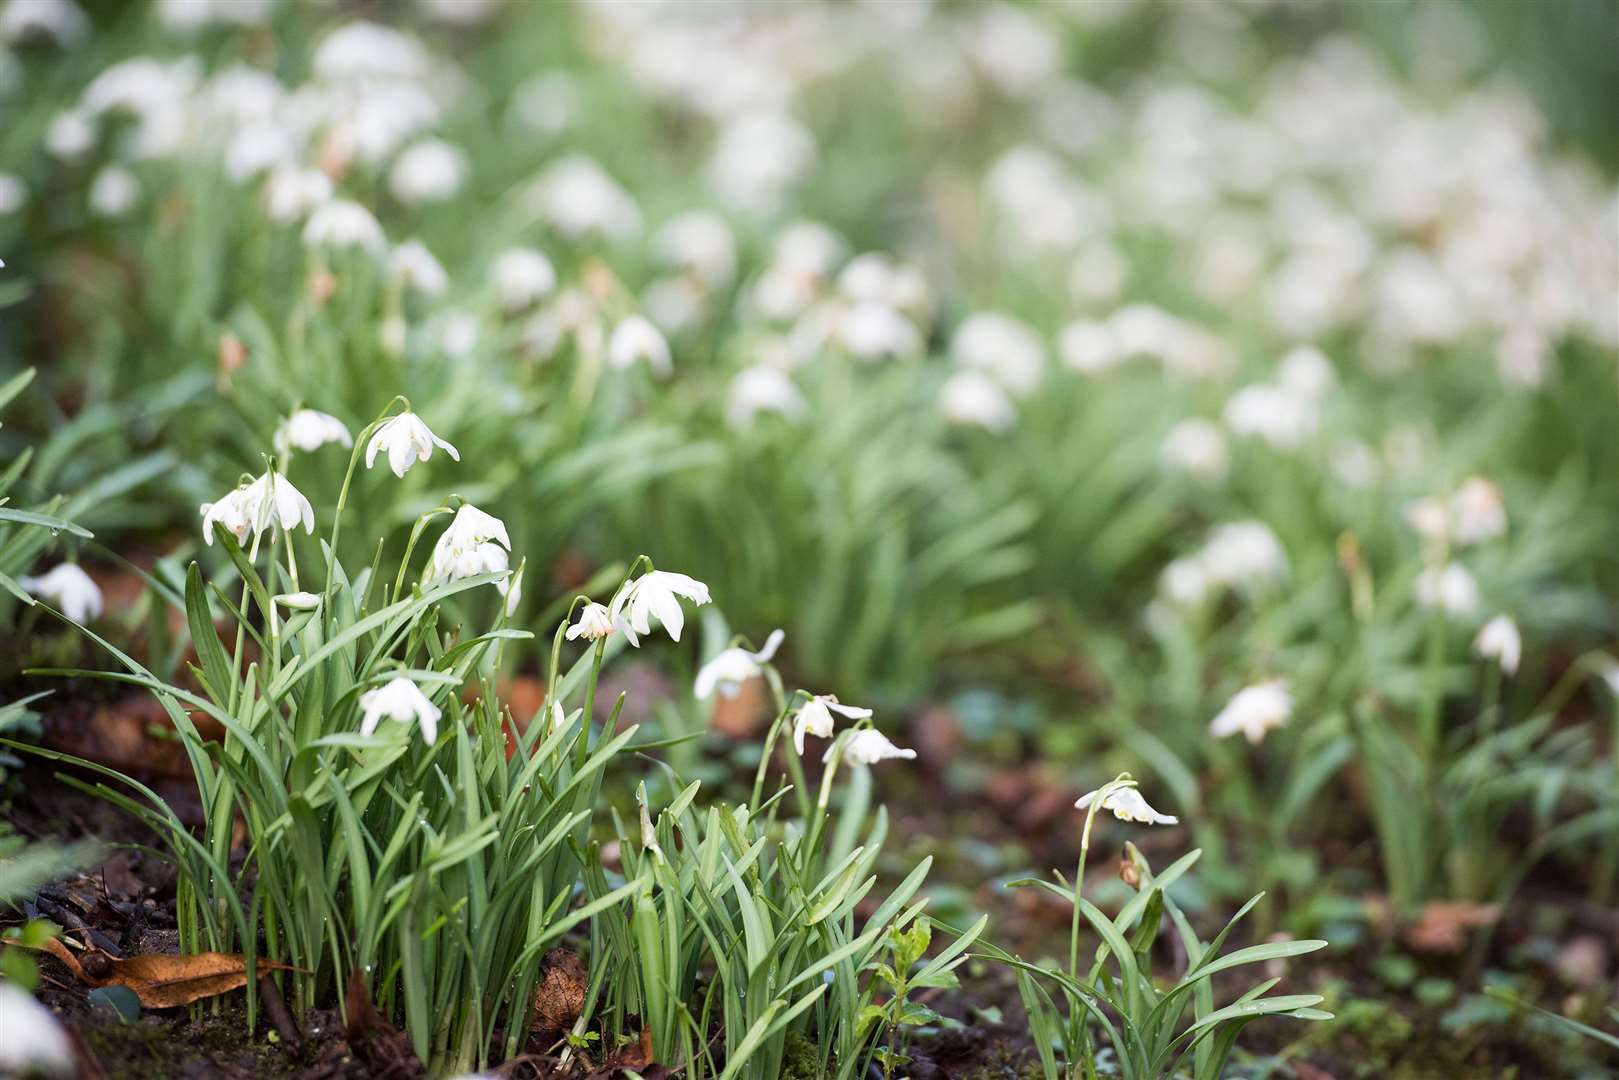 Snowdrops are springing up